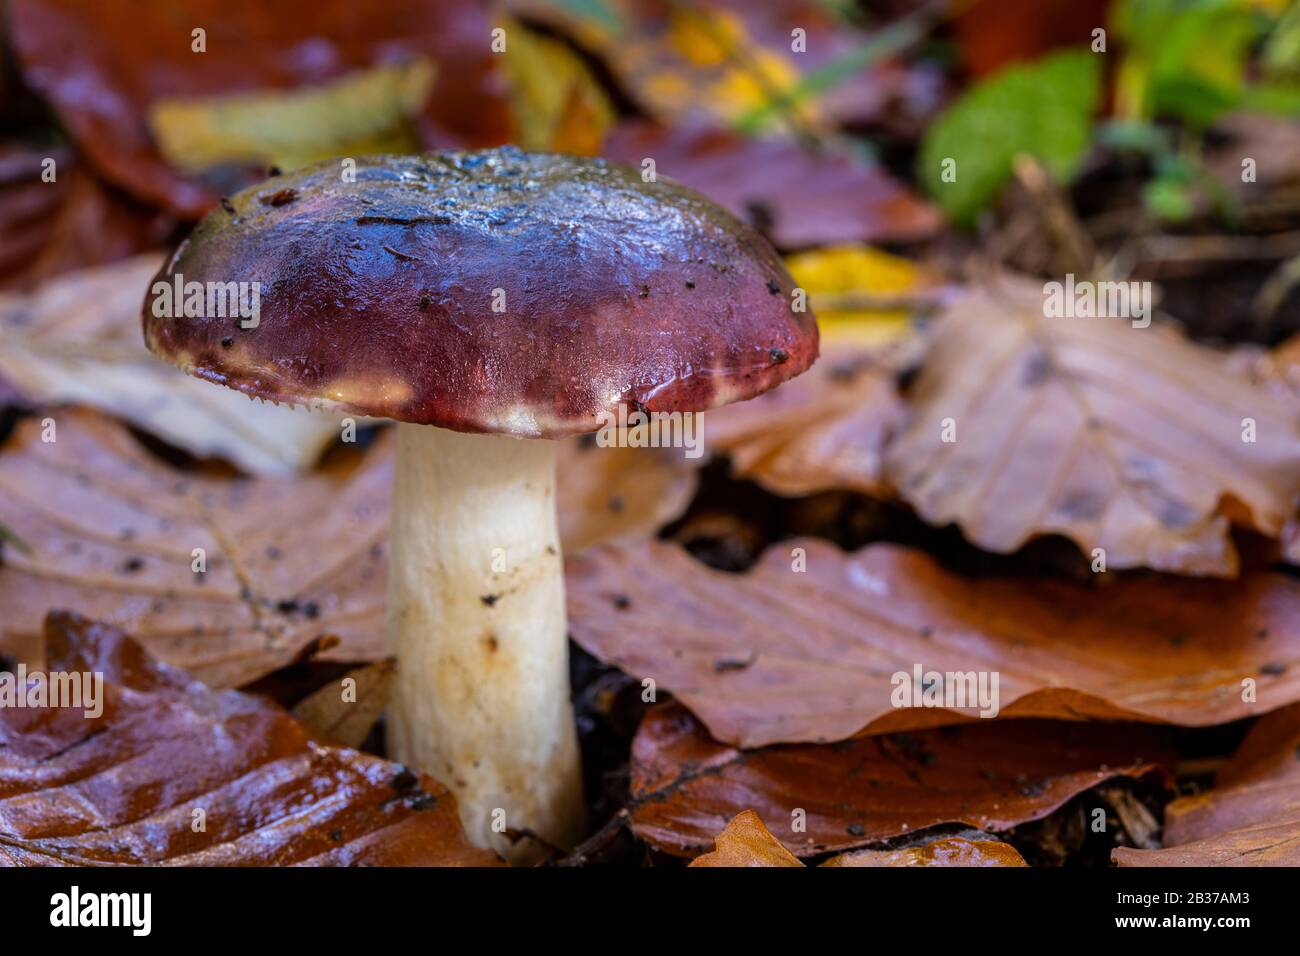 France, Somme (80), Crécy-en-Ponthieu, Crécy forest, mushroom in the forest, russula brunneoviolacea Stock Photo